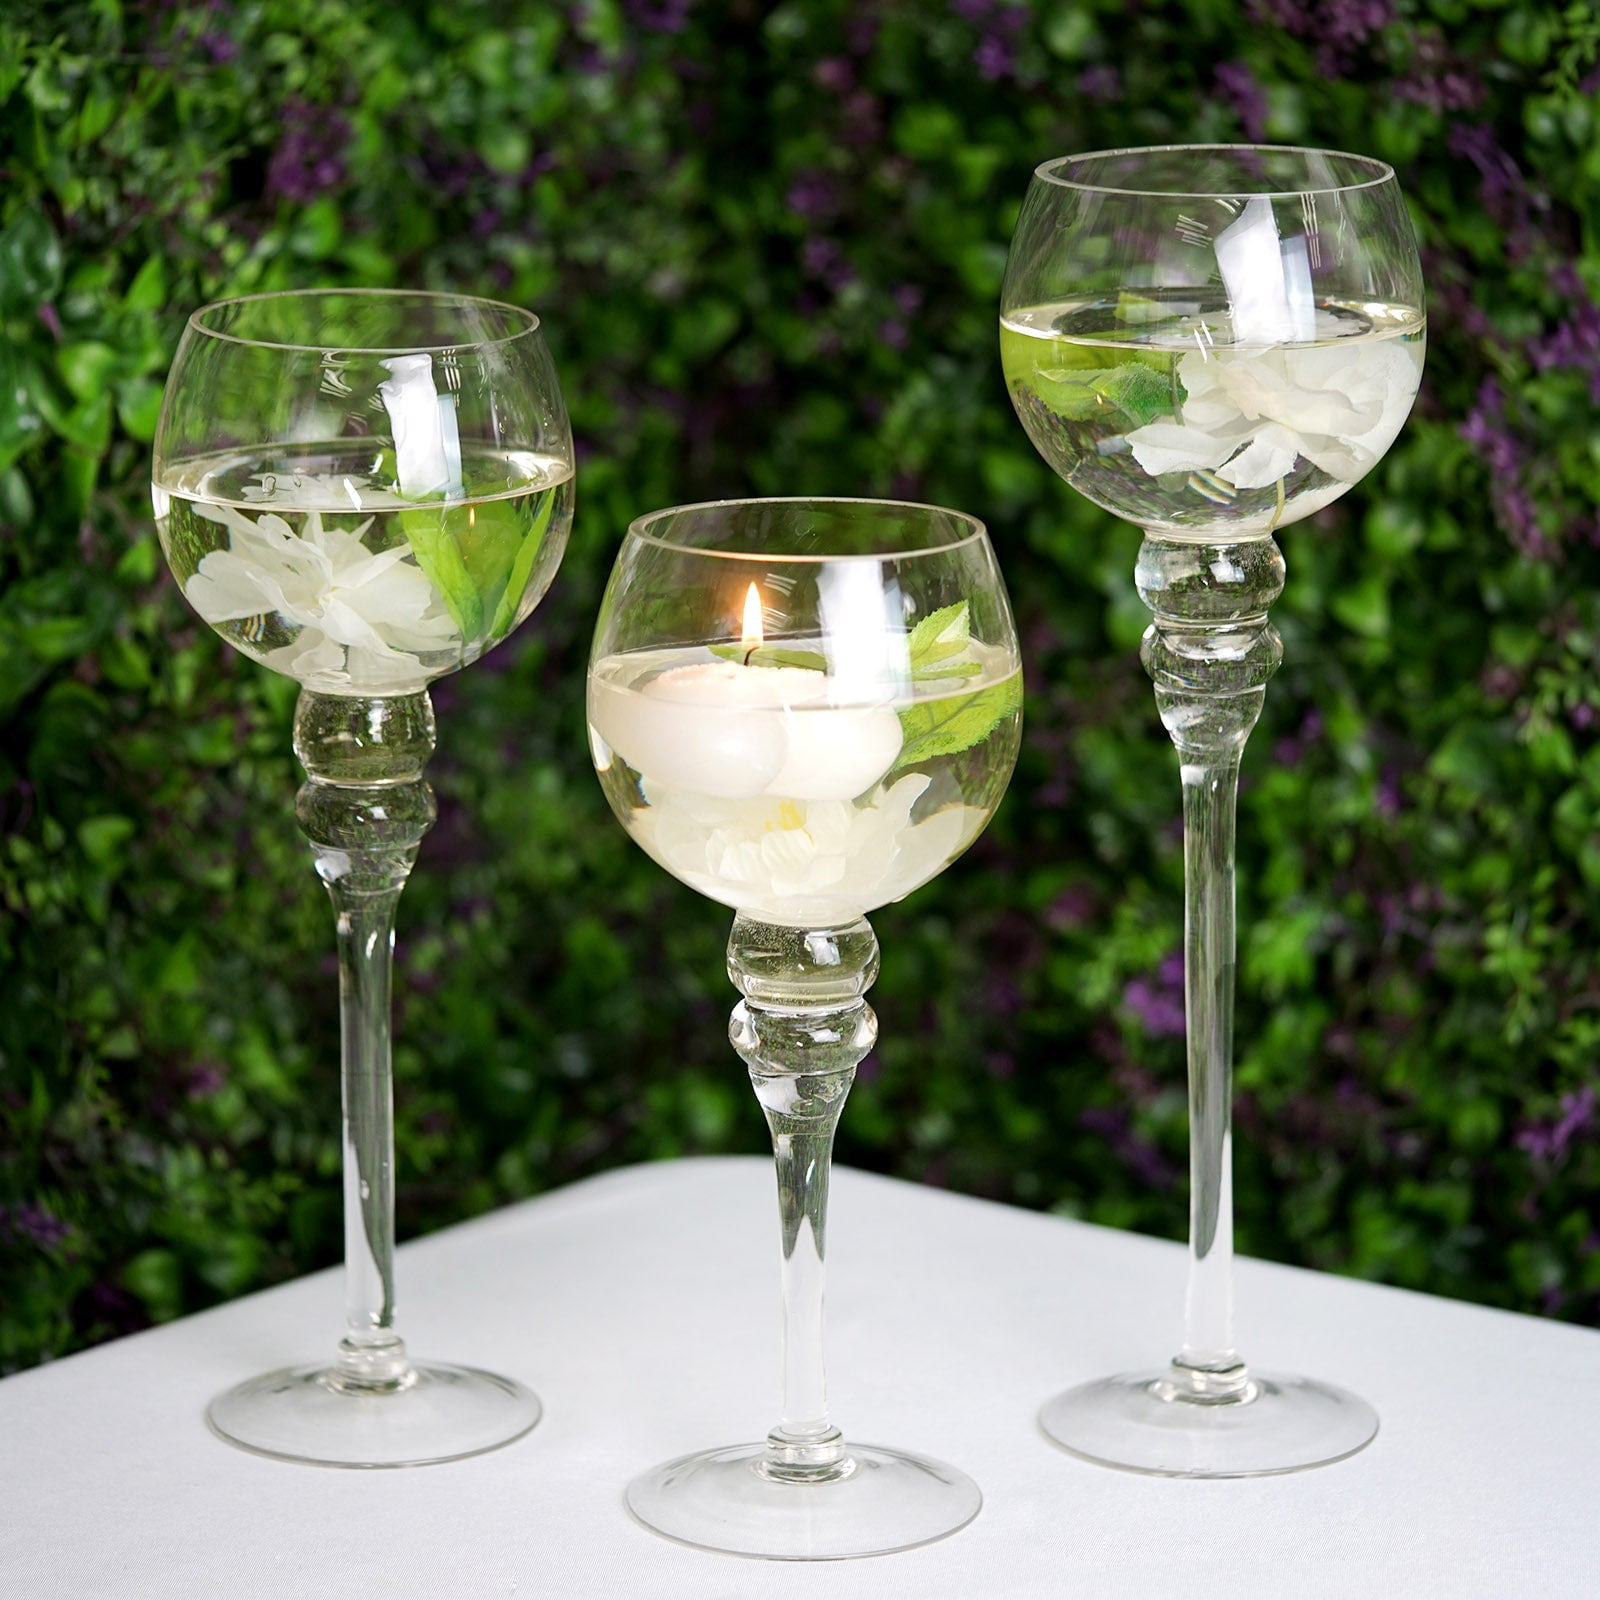 6 x Large White Hanging Glass Candle Flower Jars Wedding Table Decor Centerpiece 